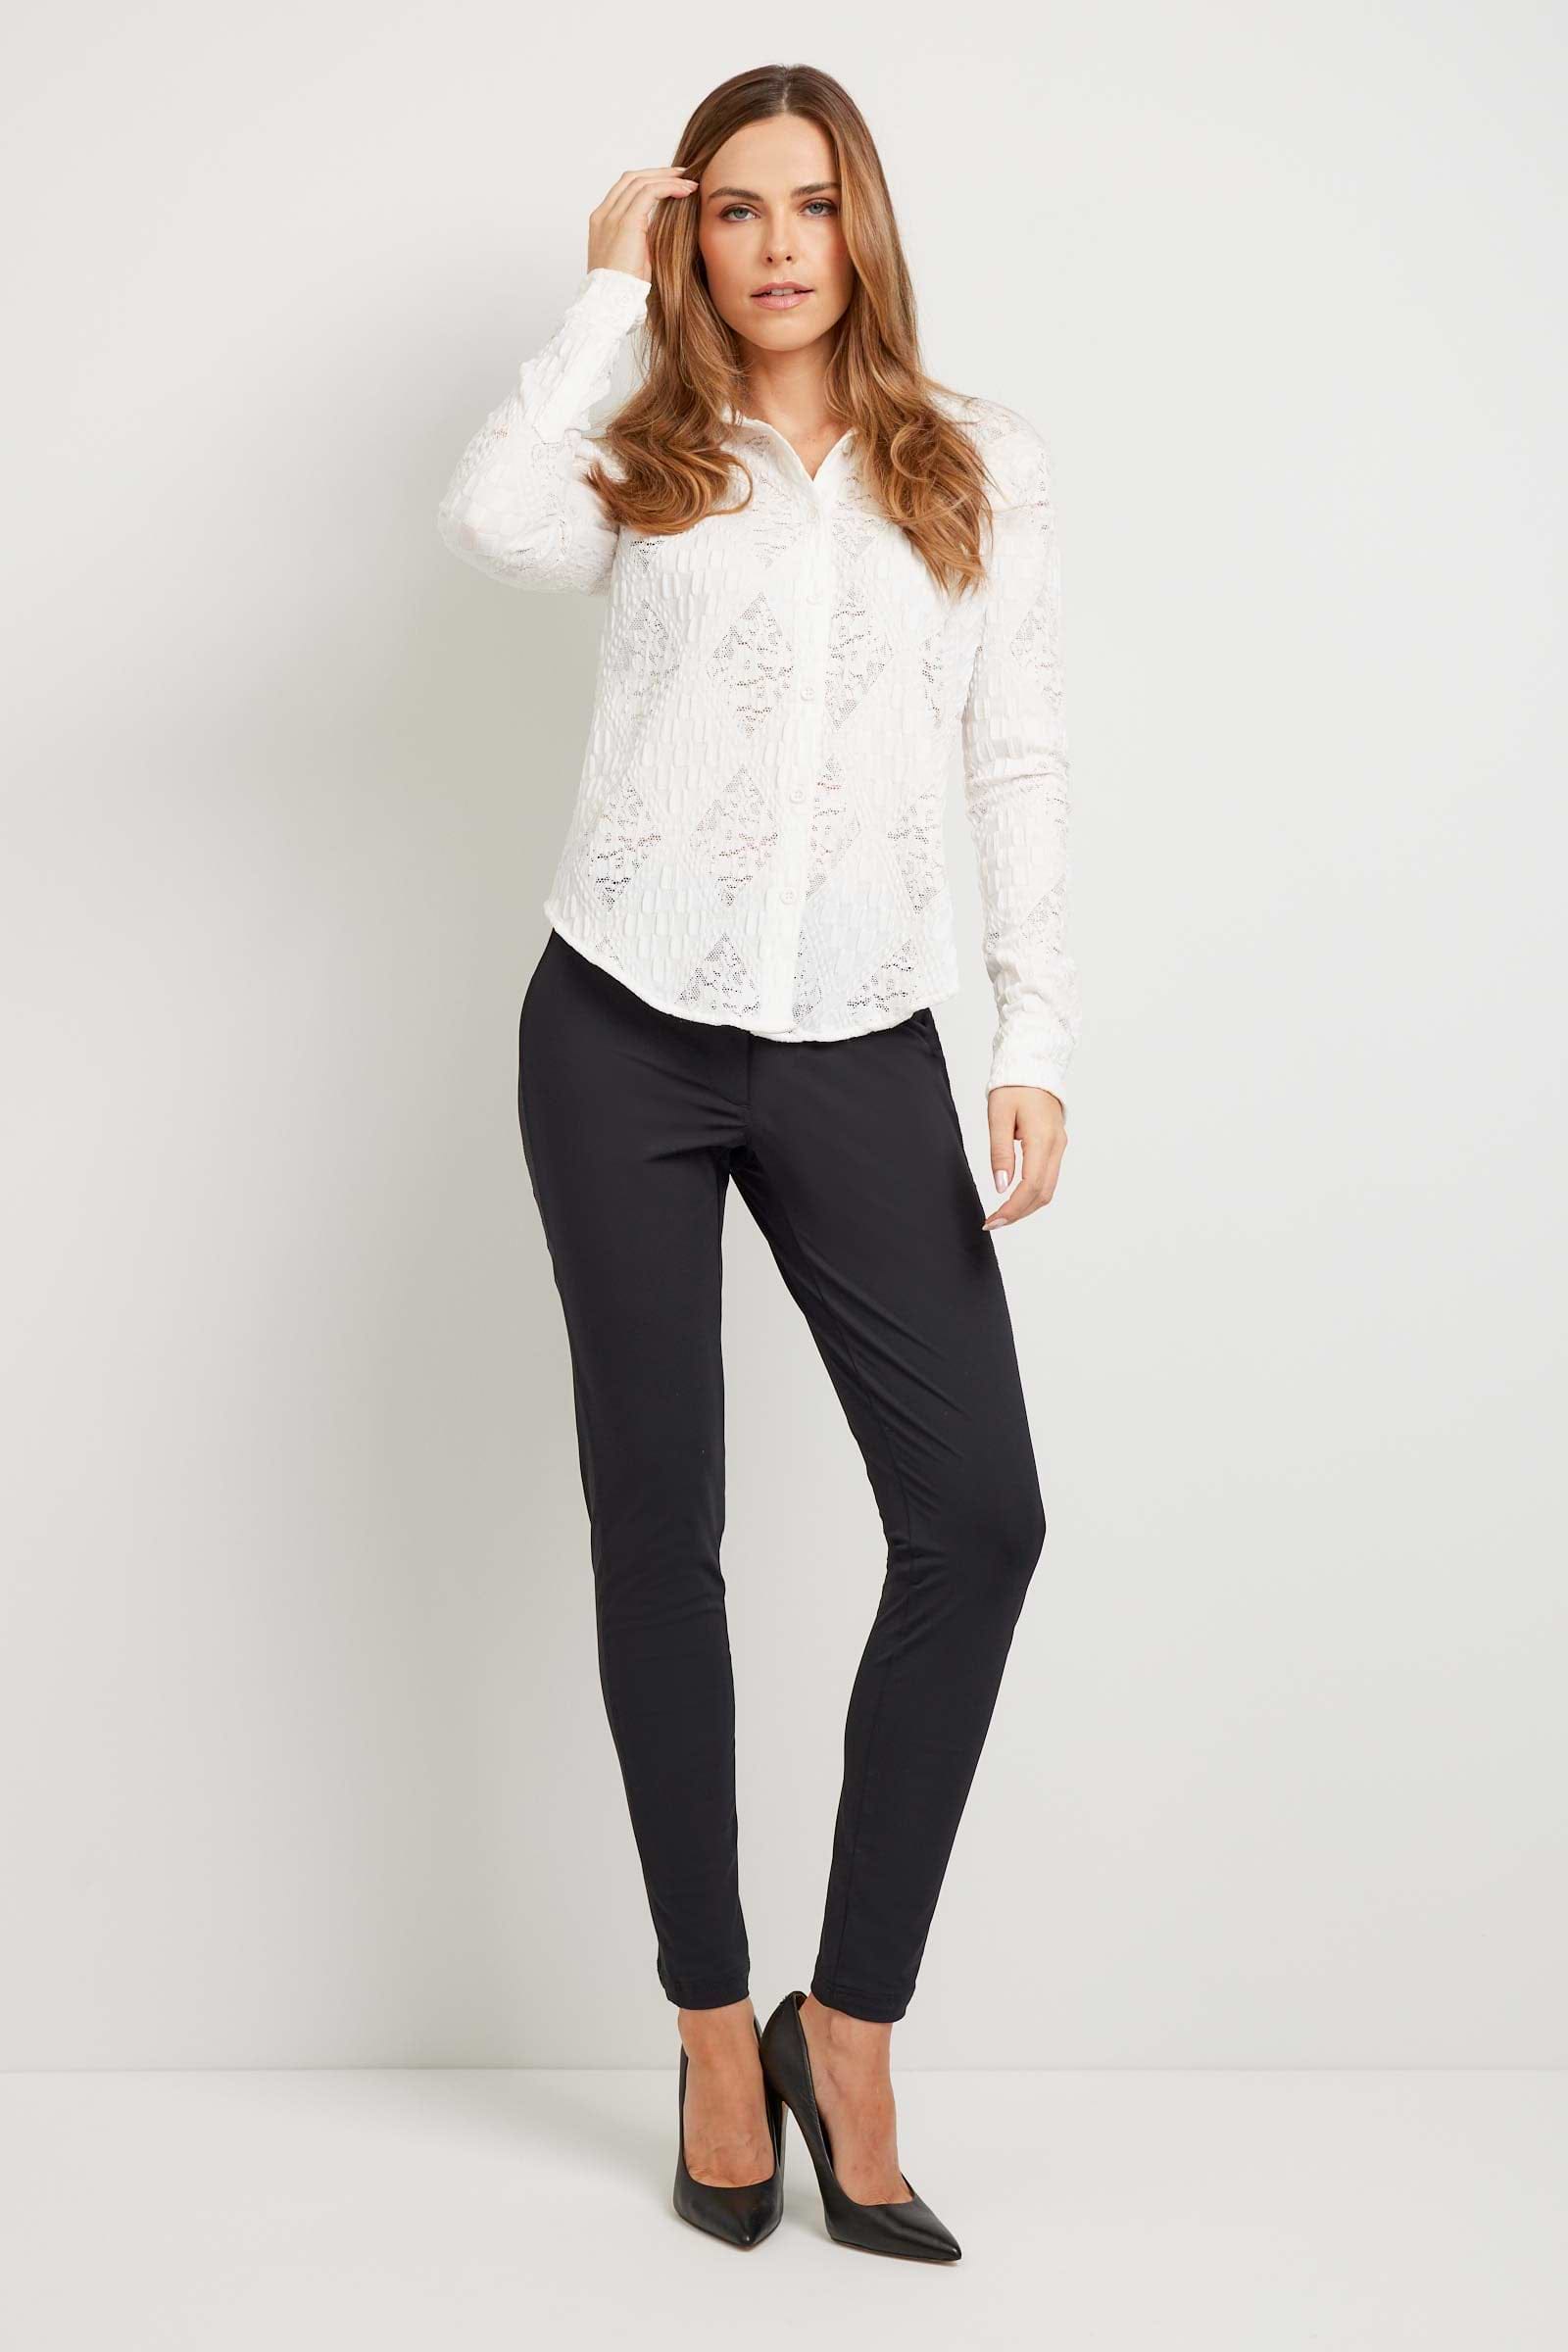 The Best Travel Top. Woman Showing the Front Profile of a Lace Taylee Top in White.